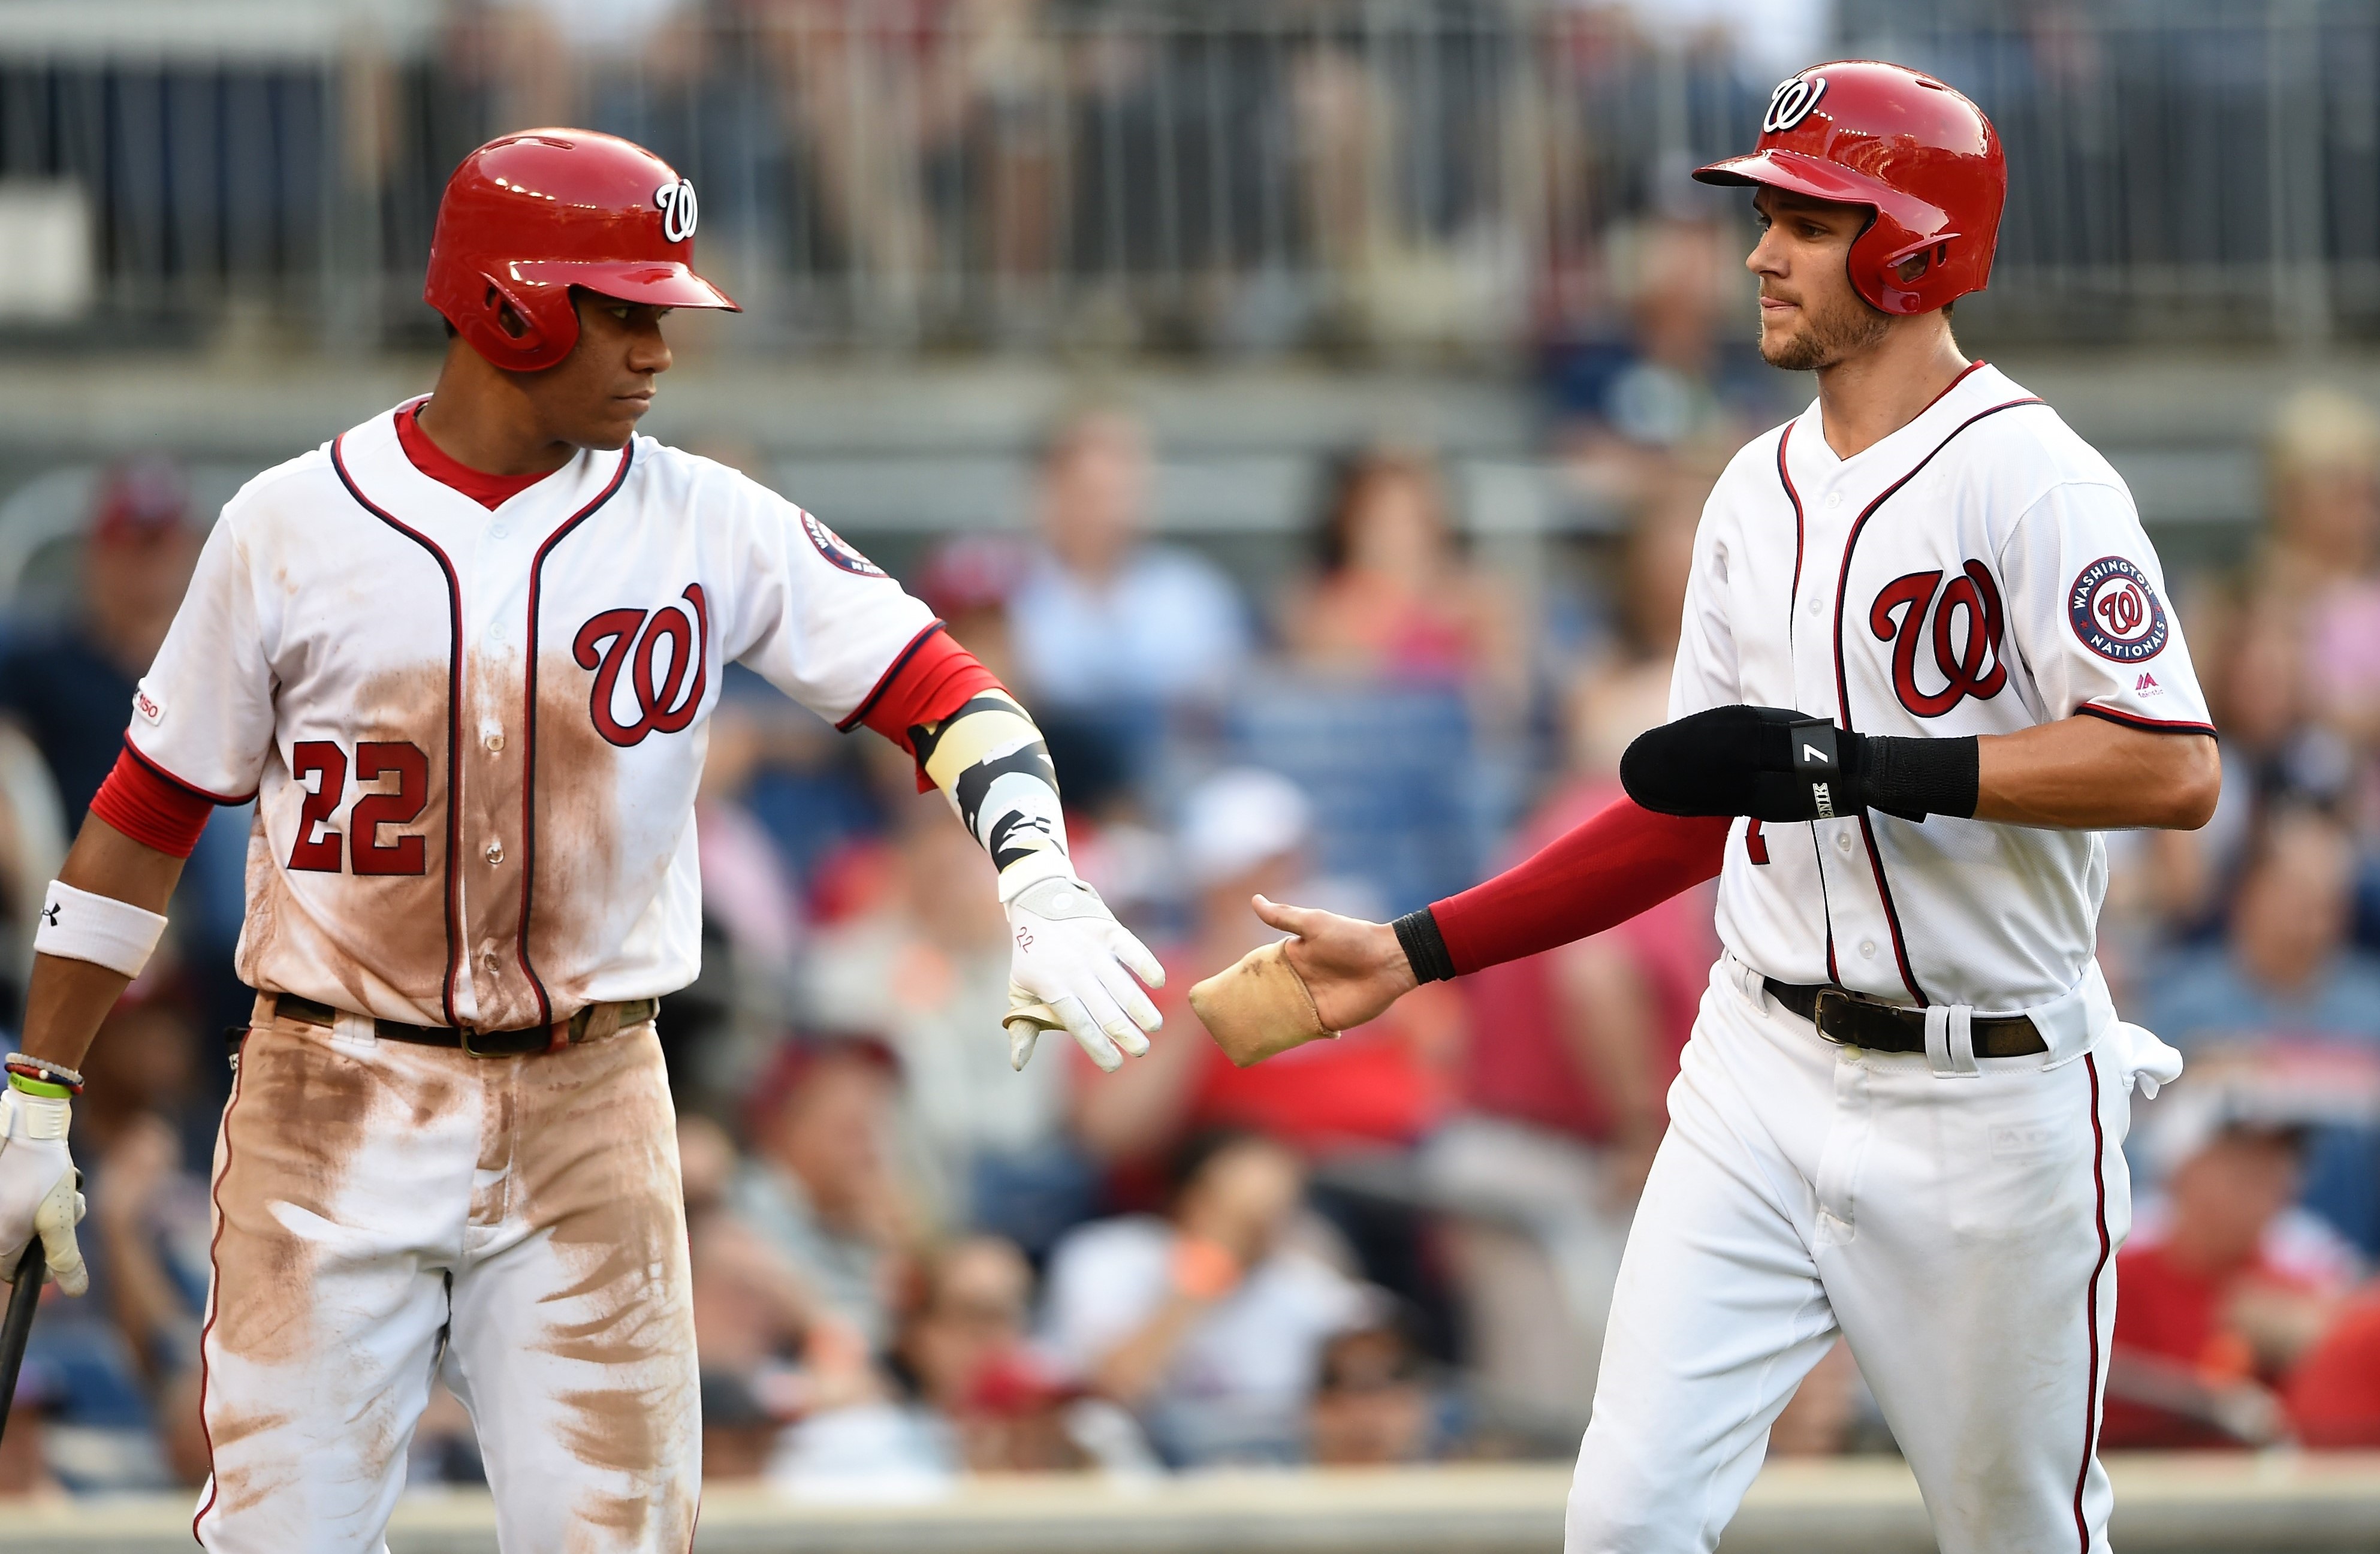 The math could work for the #Nats to extend Trea and Soto!